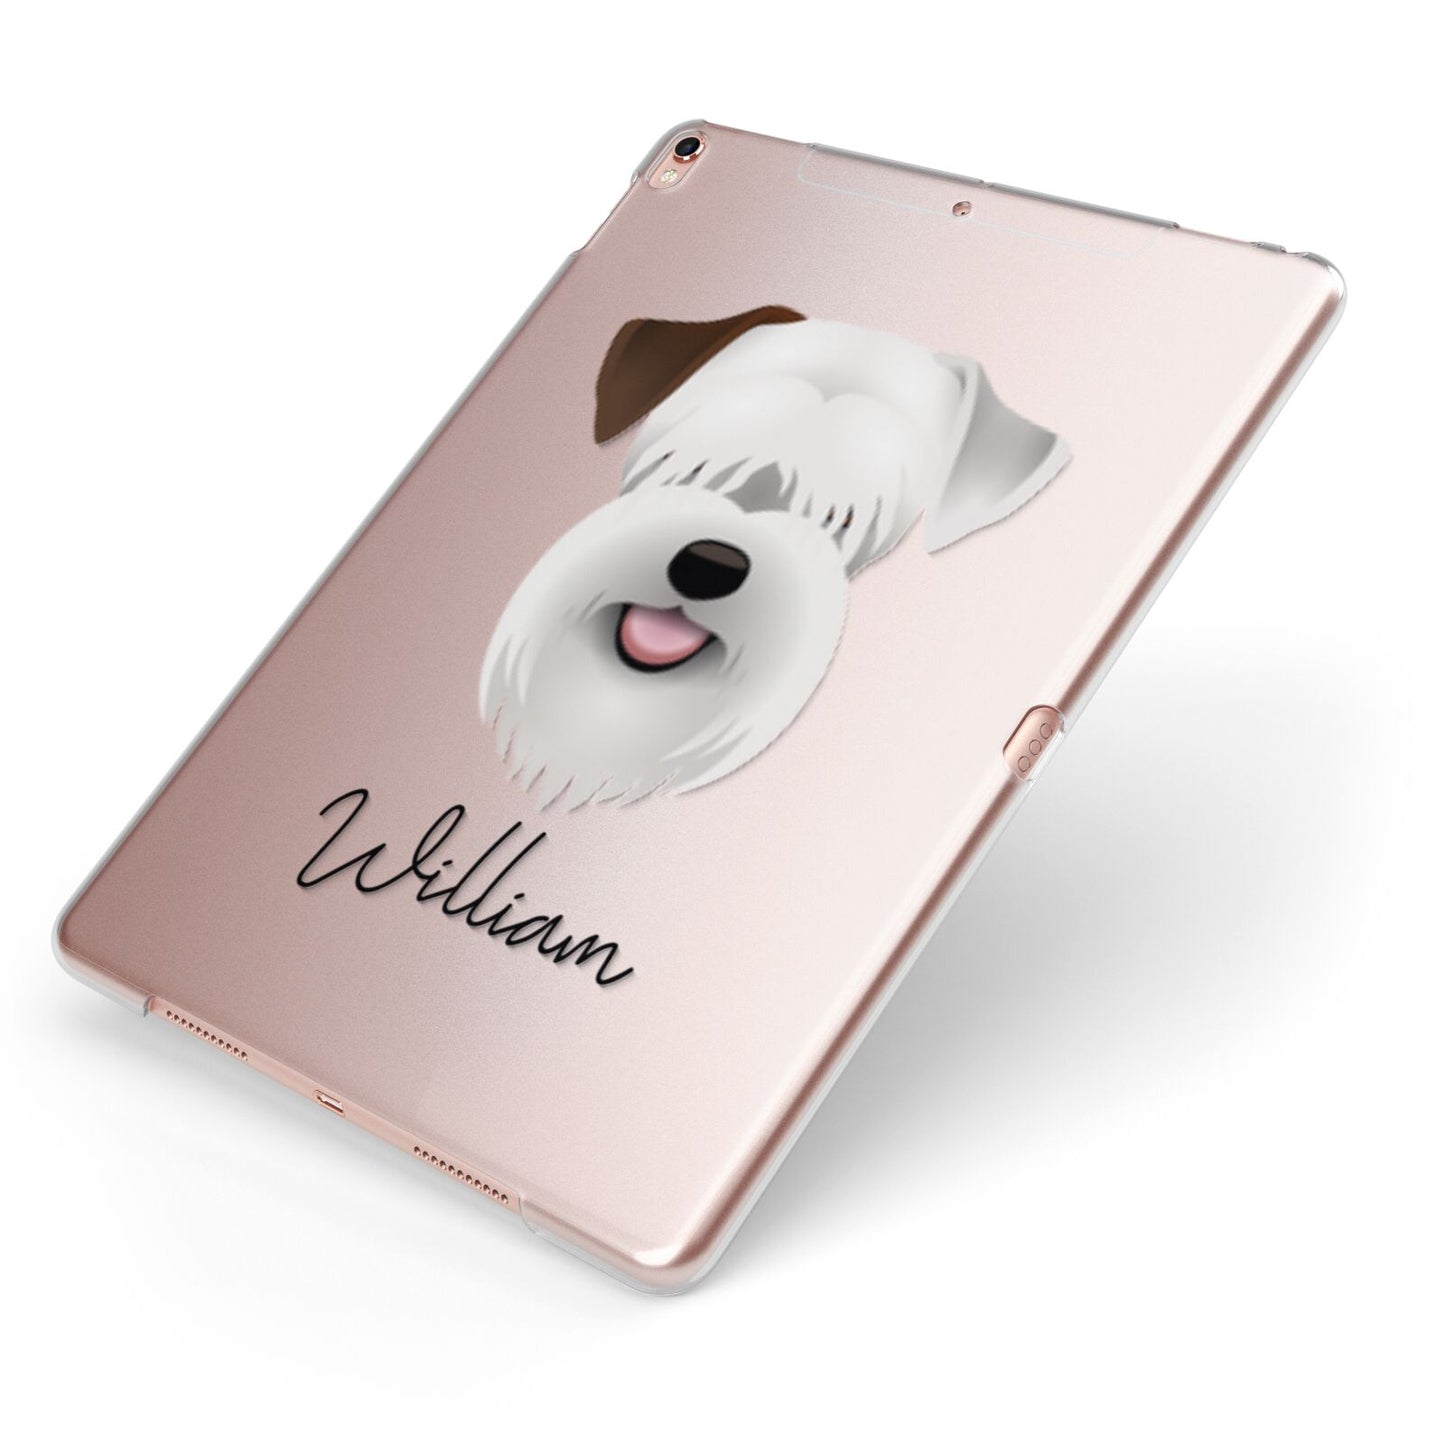 Sealyham Terrier Personalised Apple iPad Case on Rose Gold iPad Side View